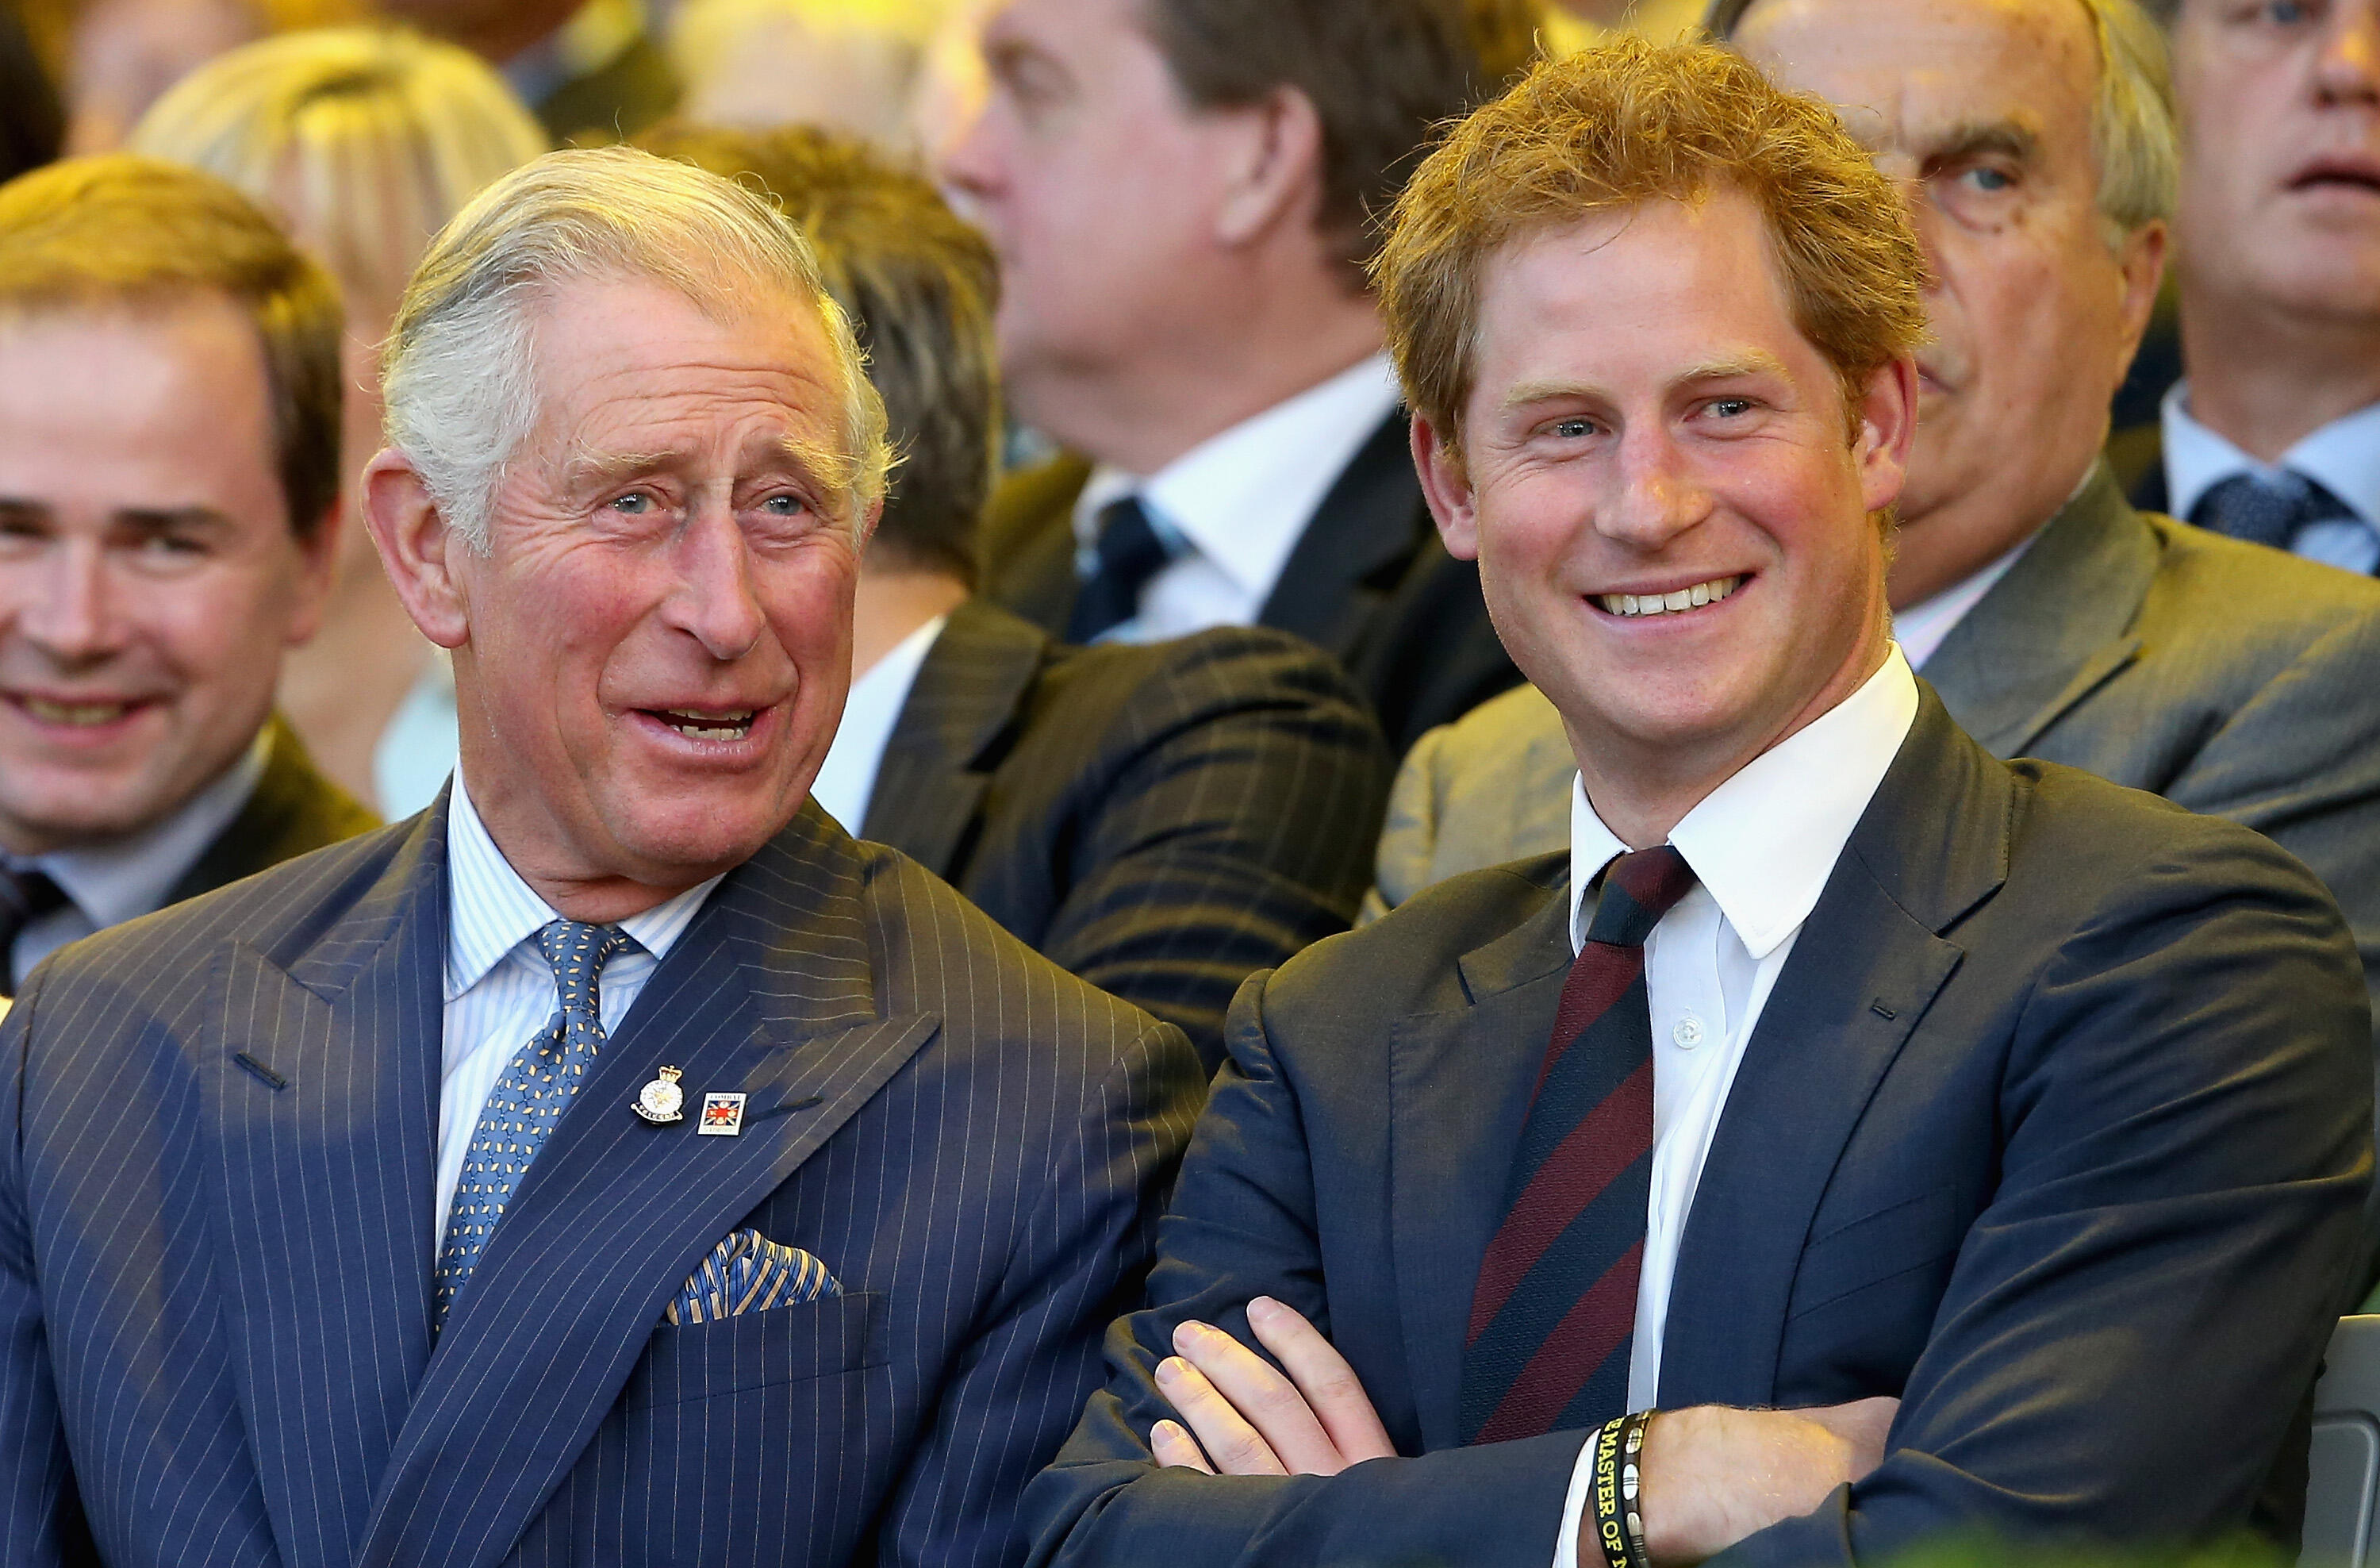 Prince Charles Will Financially Support Prince Harry And Meghan Markle - Thumbnail Image